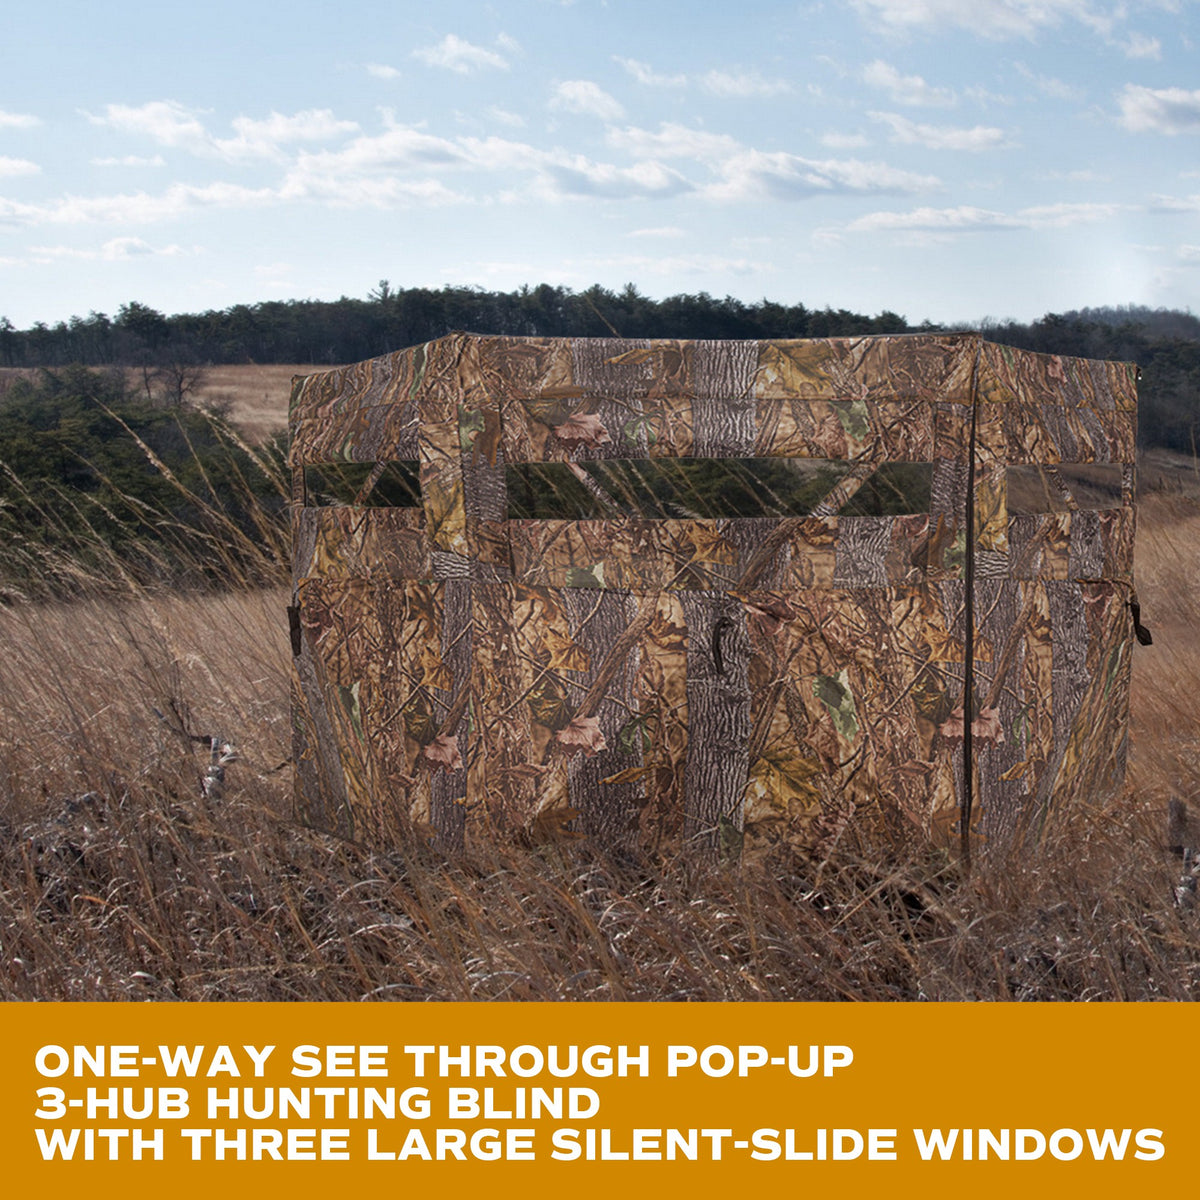 RPNB HGB-5 3-Hub Camouflage Ground Hunting Blind One-Way See Through Hidden In the Grass